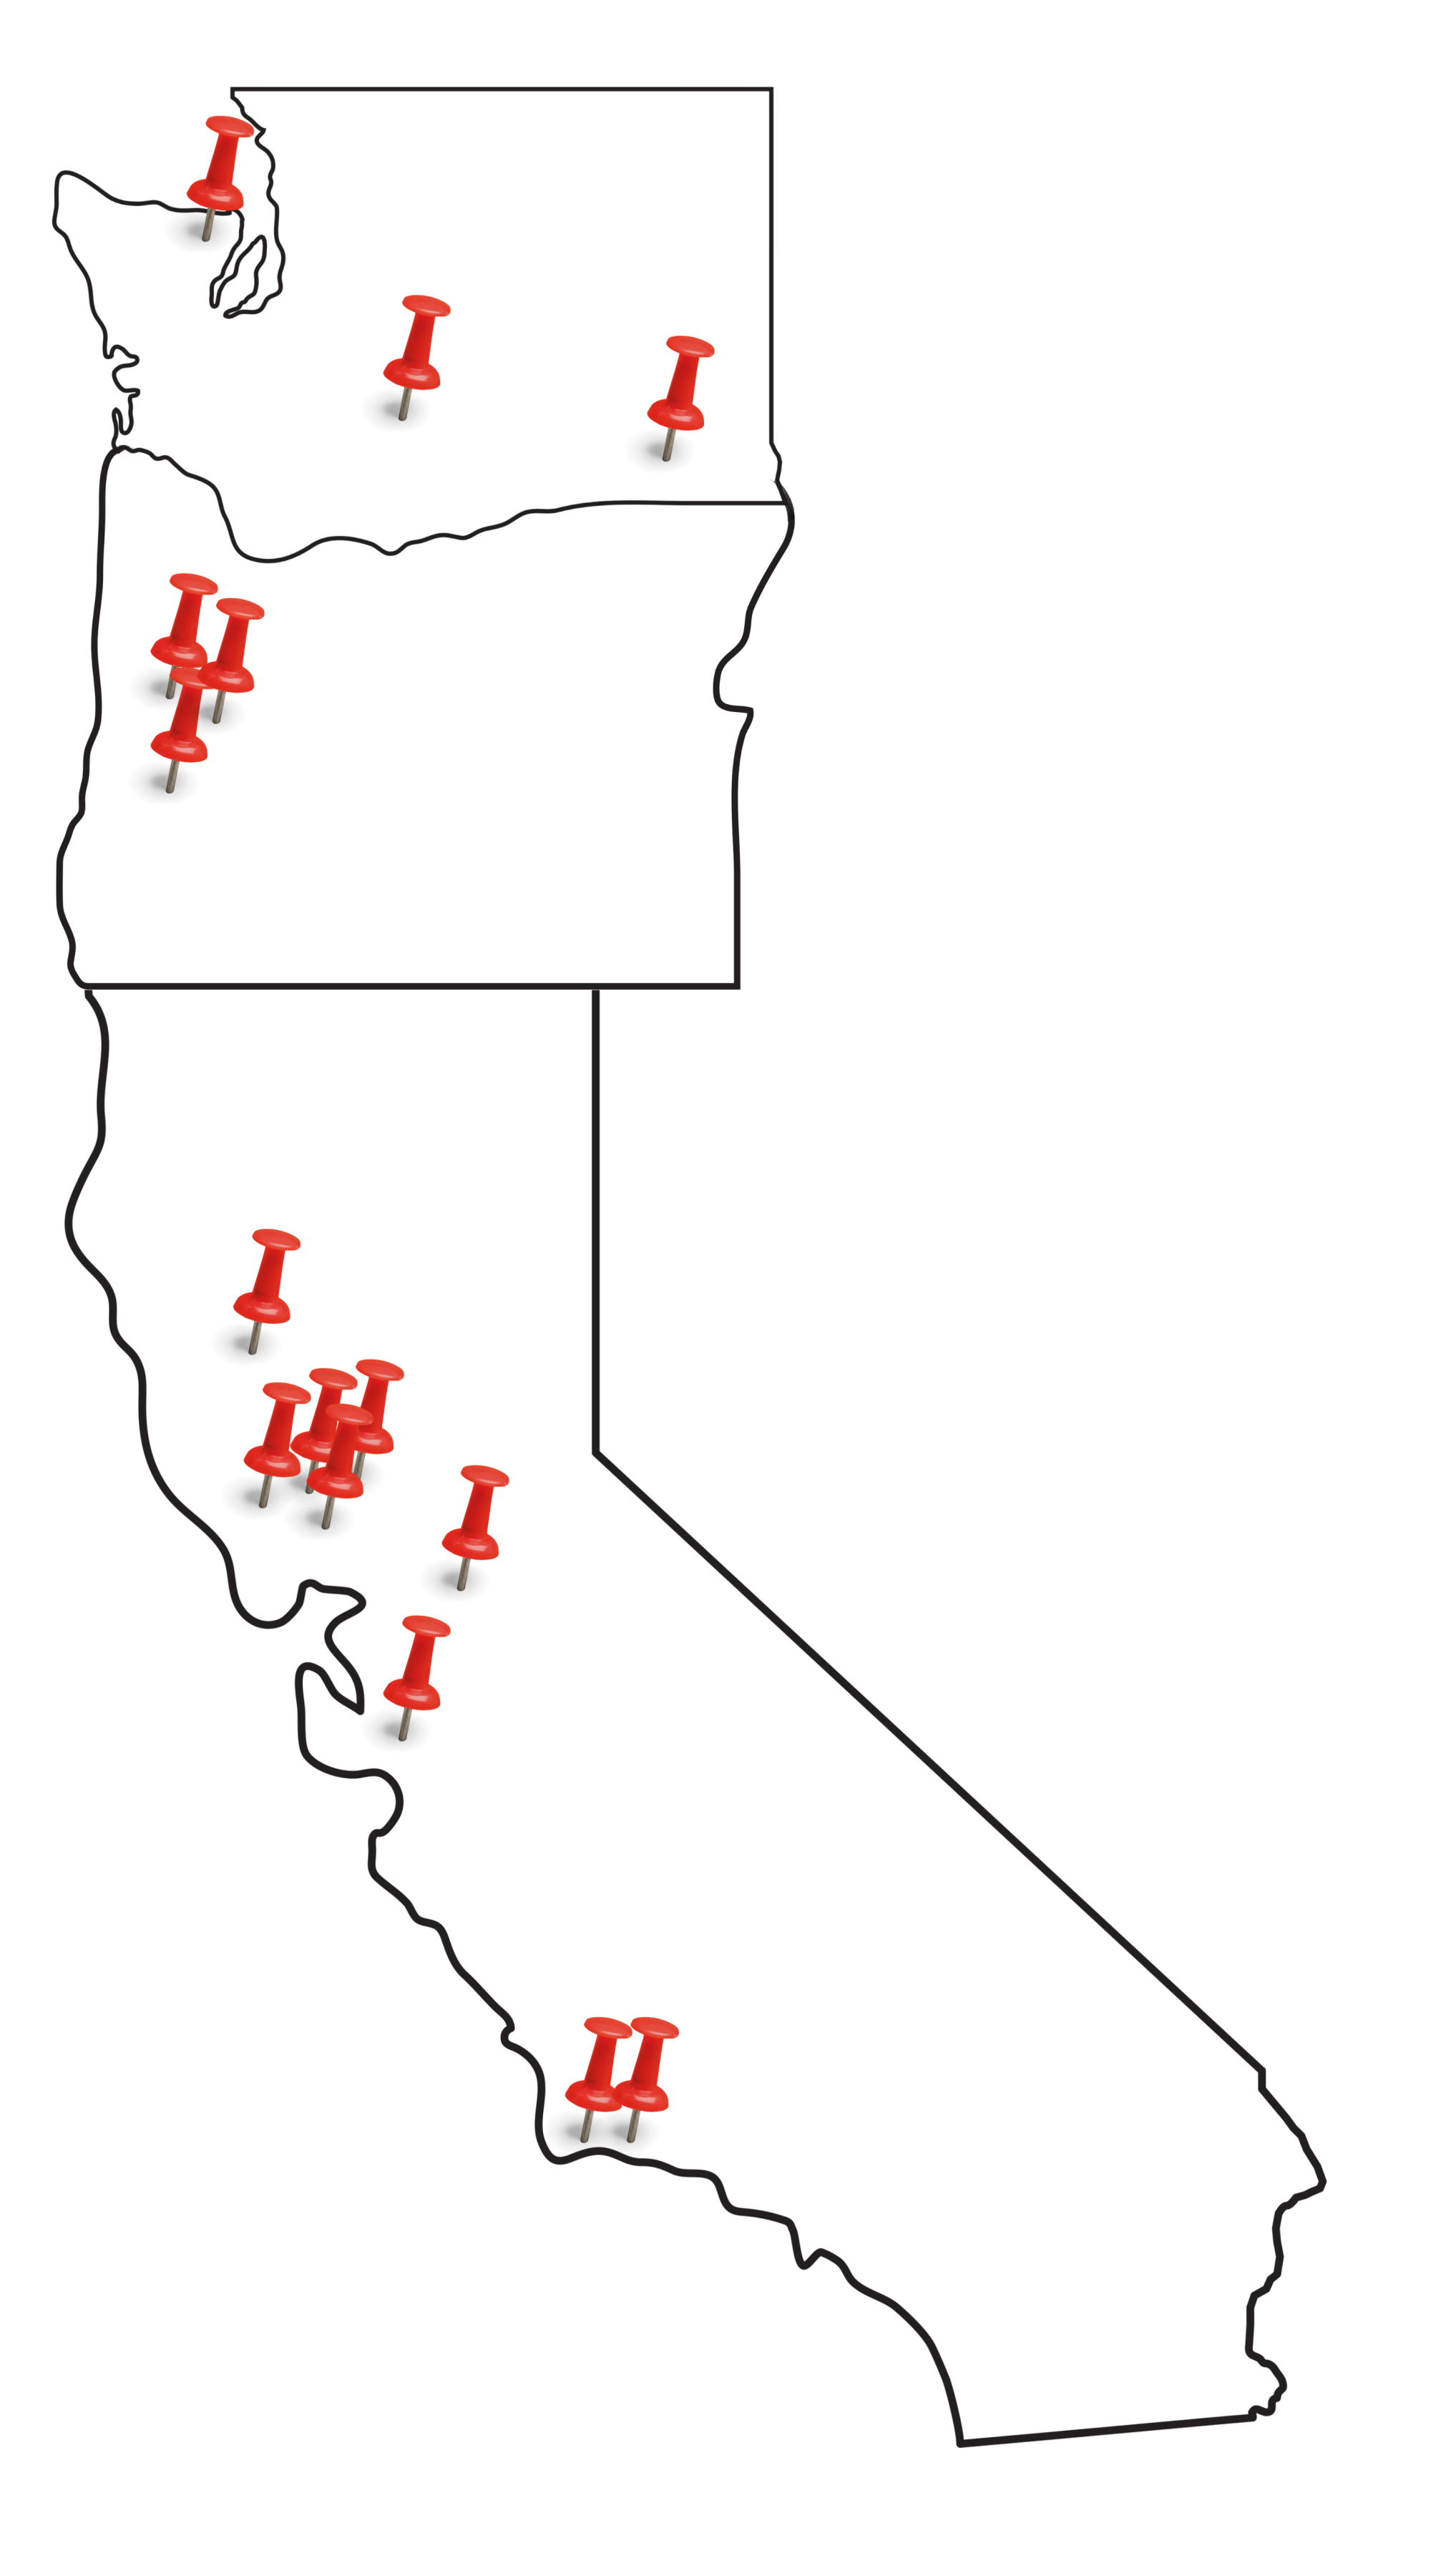 Map of CA, OR, and WA with red pins placed showing the location of Aggies Uncorked wine partners